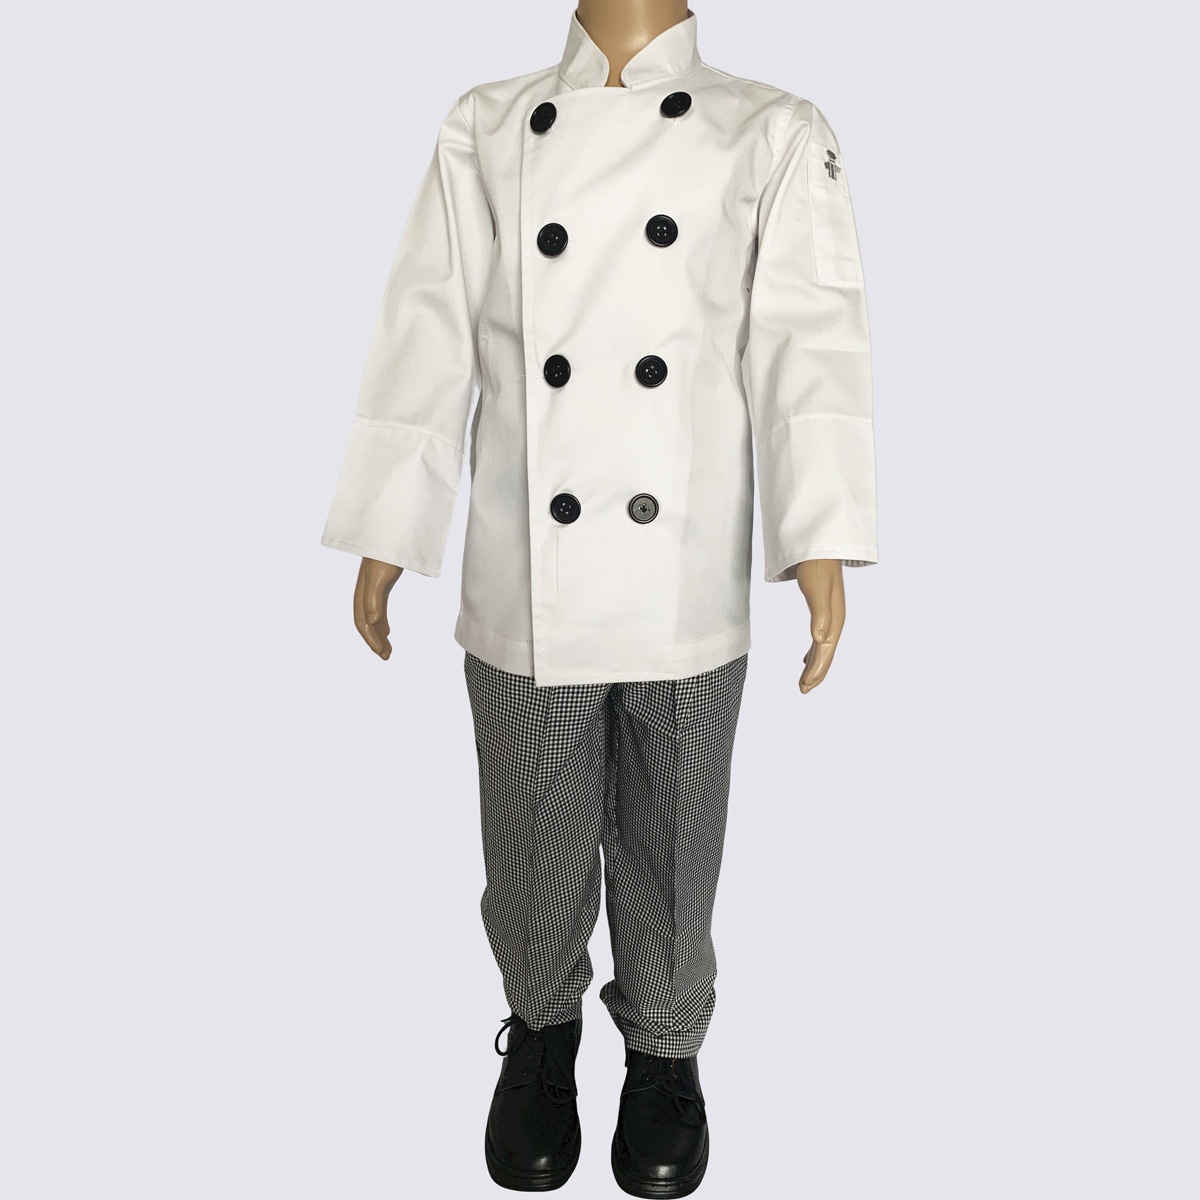 Kids Chef Jacket and Pant Only with Black Buttons ( Apron and Cap not Included)